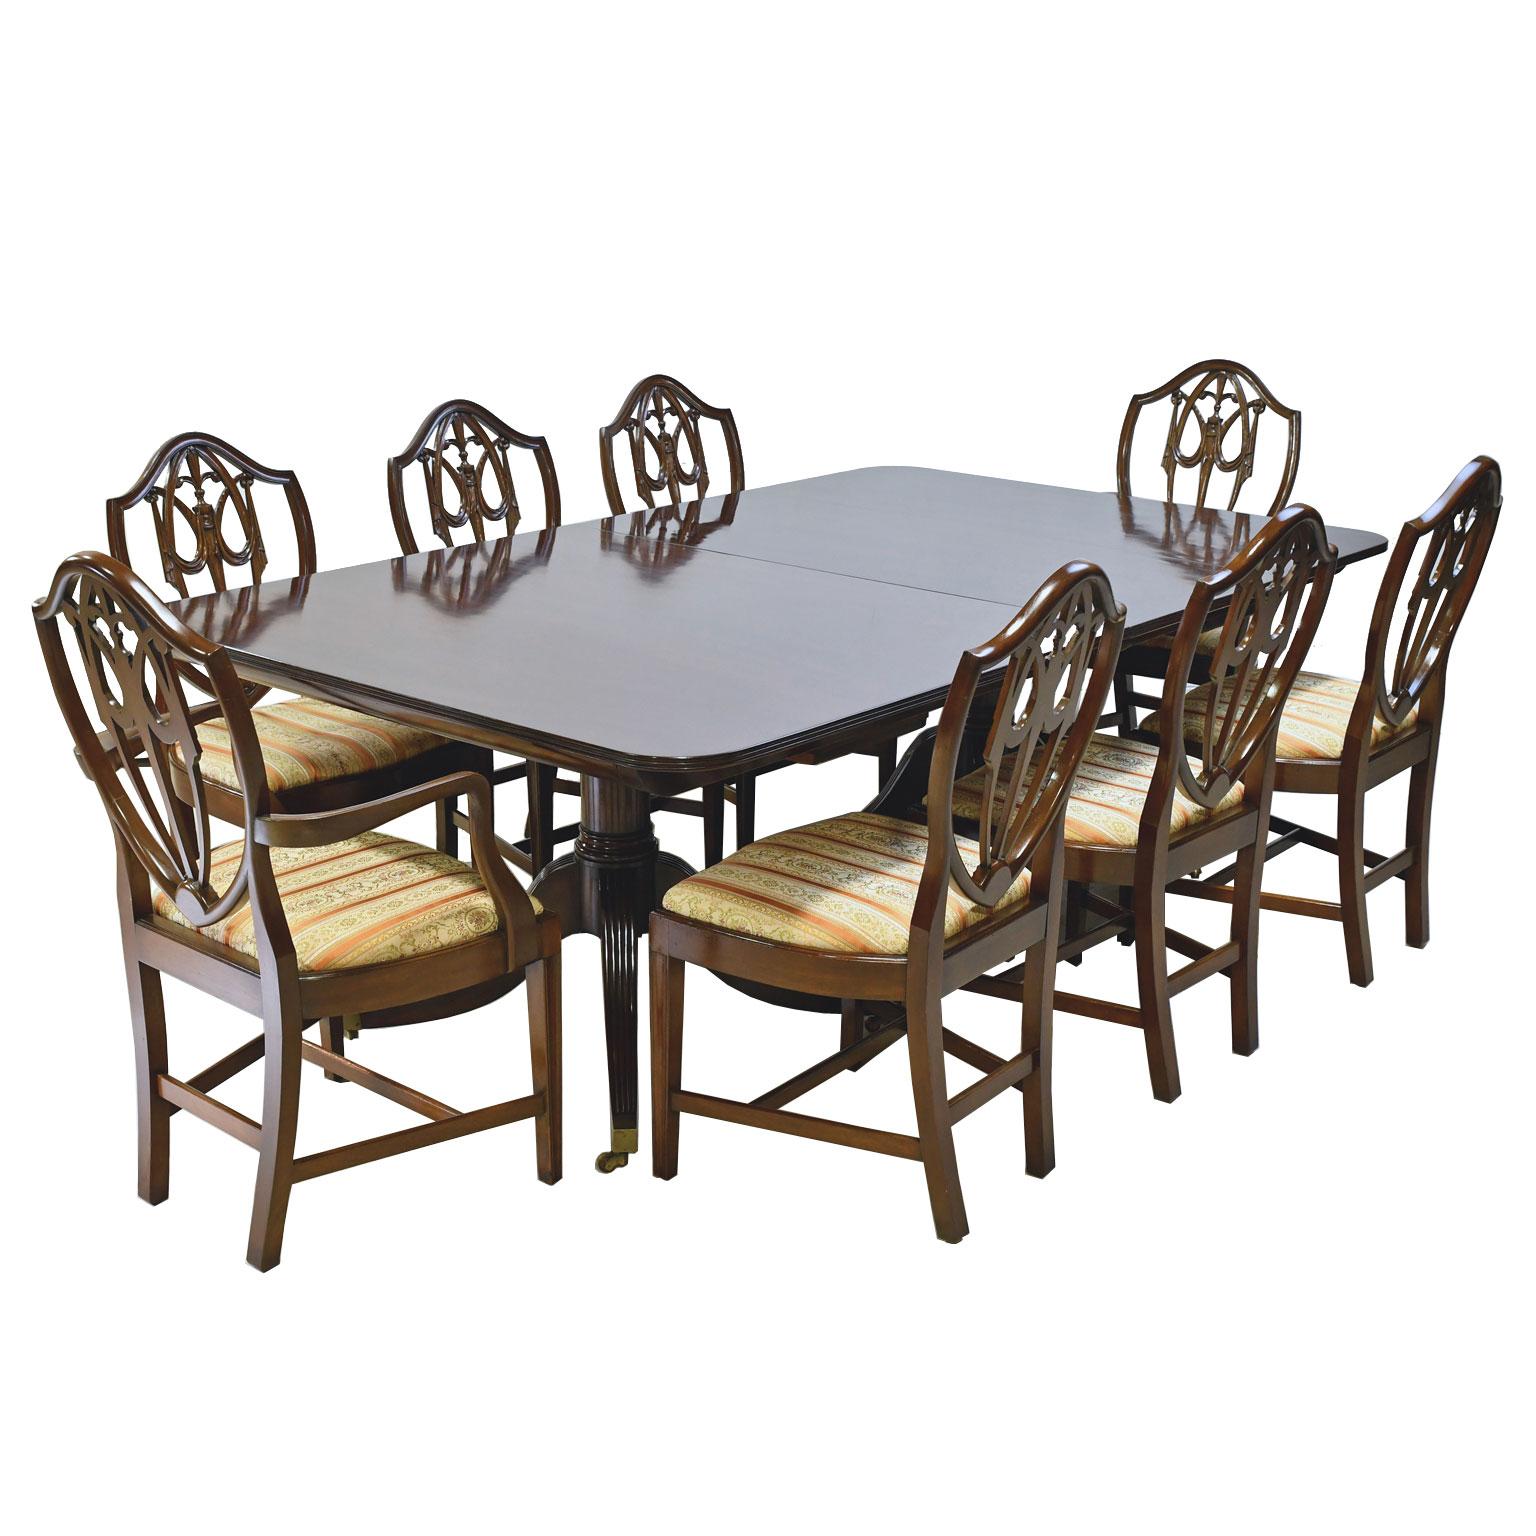 12' Hepplewhite-Style Dining Table Mahogany, 2 Pedestals, 3 Leaves, circa 1945 7